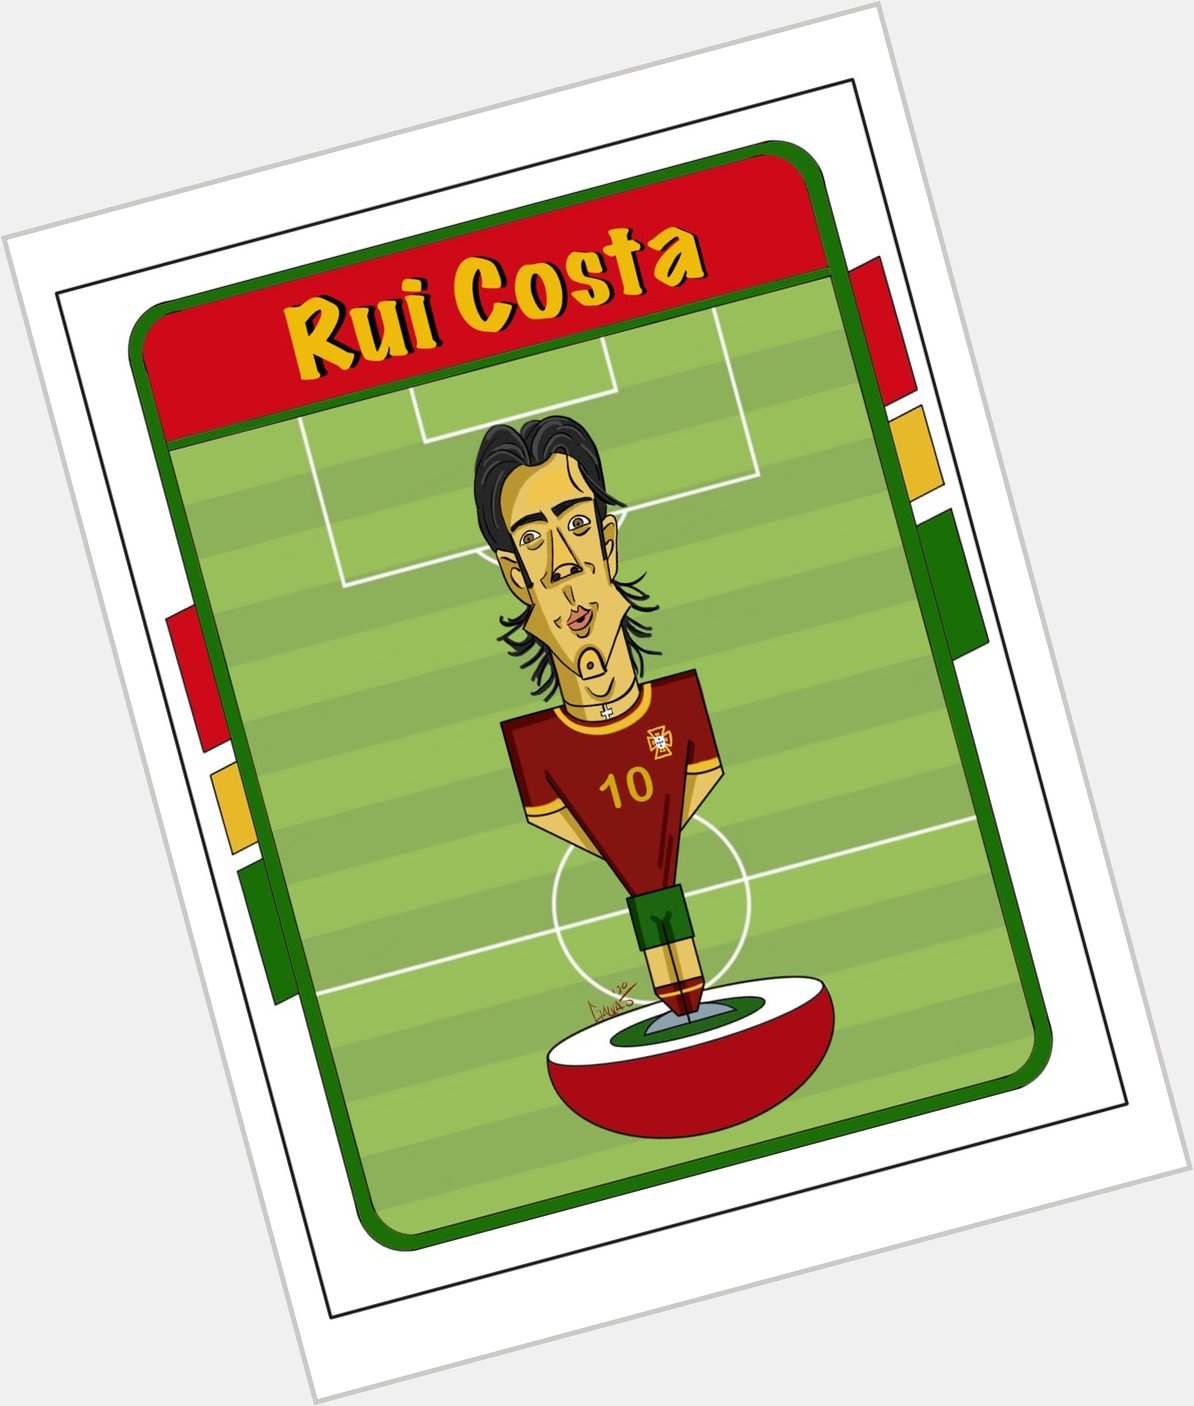 Parabems, happy birthday to legend member of Portugal s golden generation, Rui Costa! 